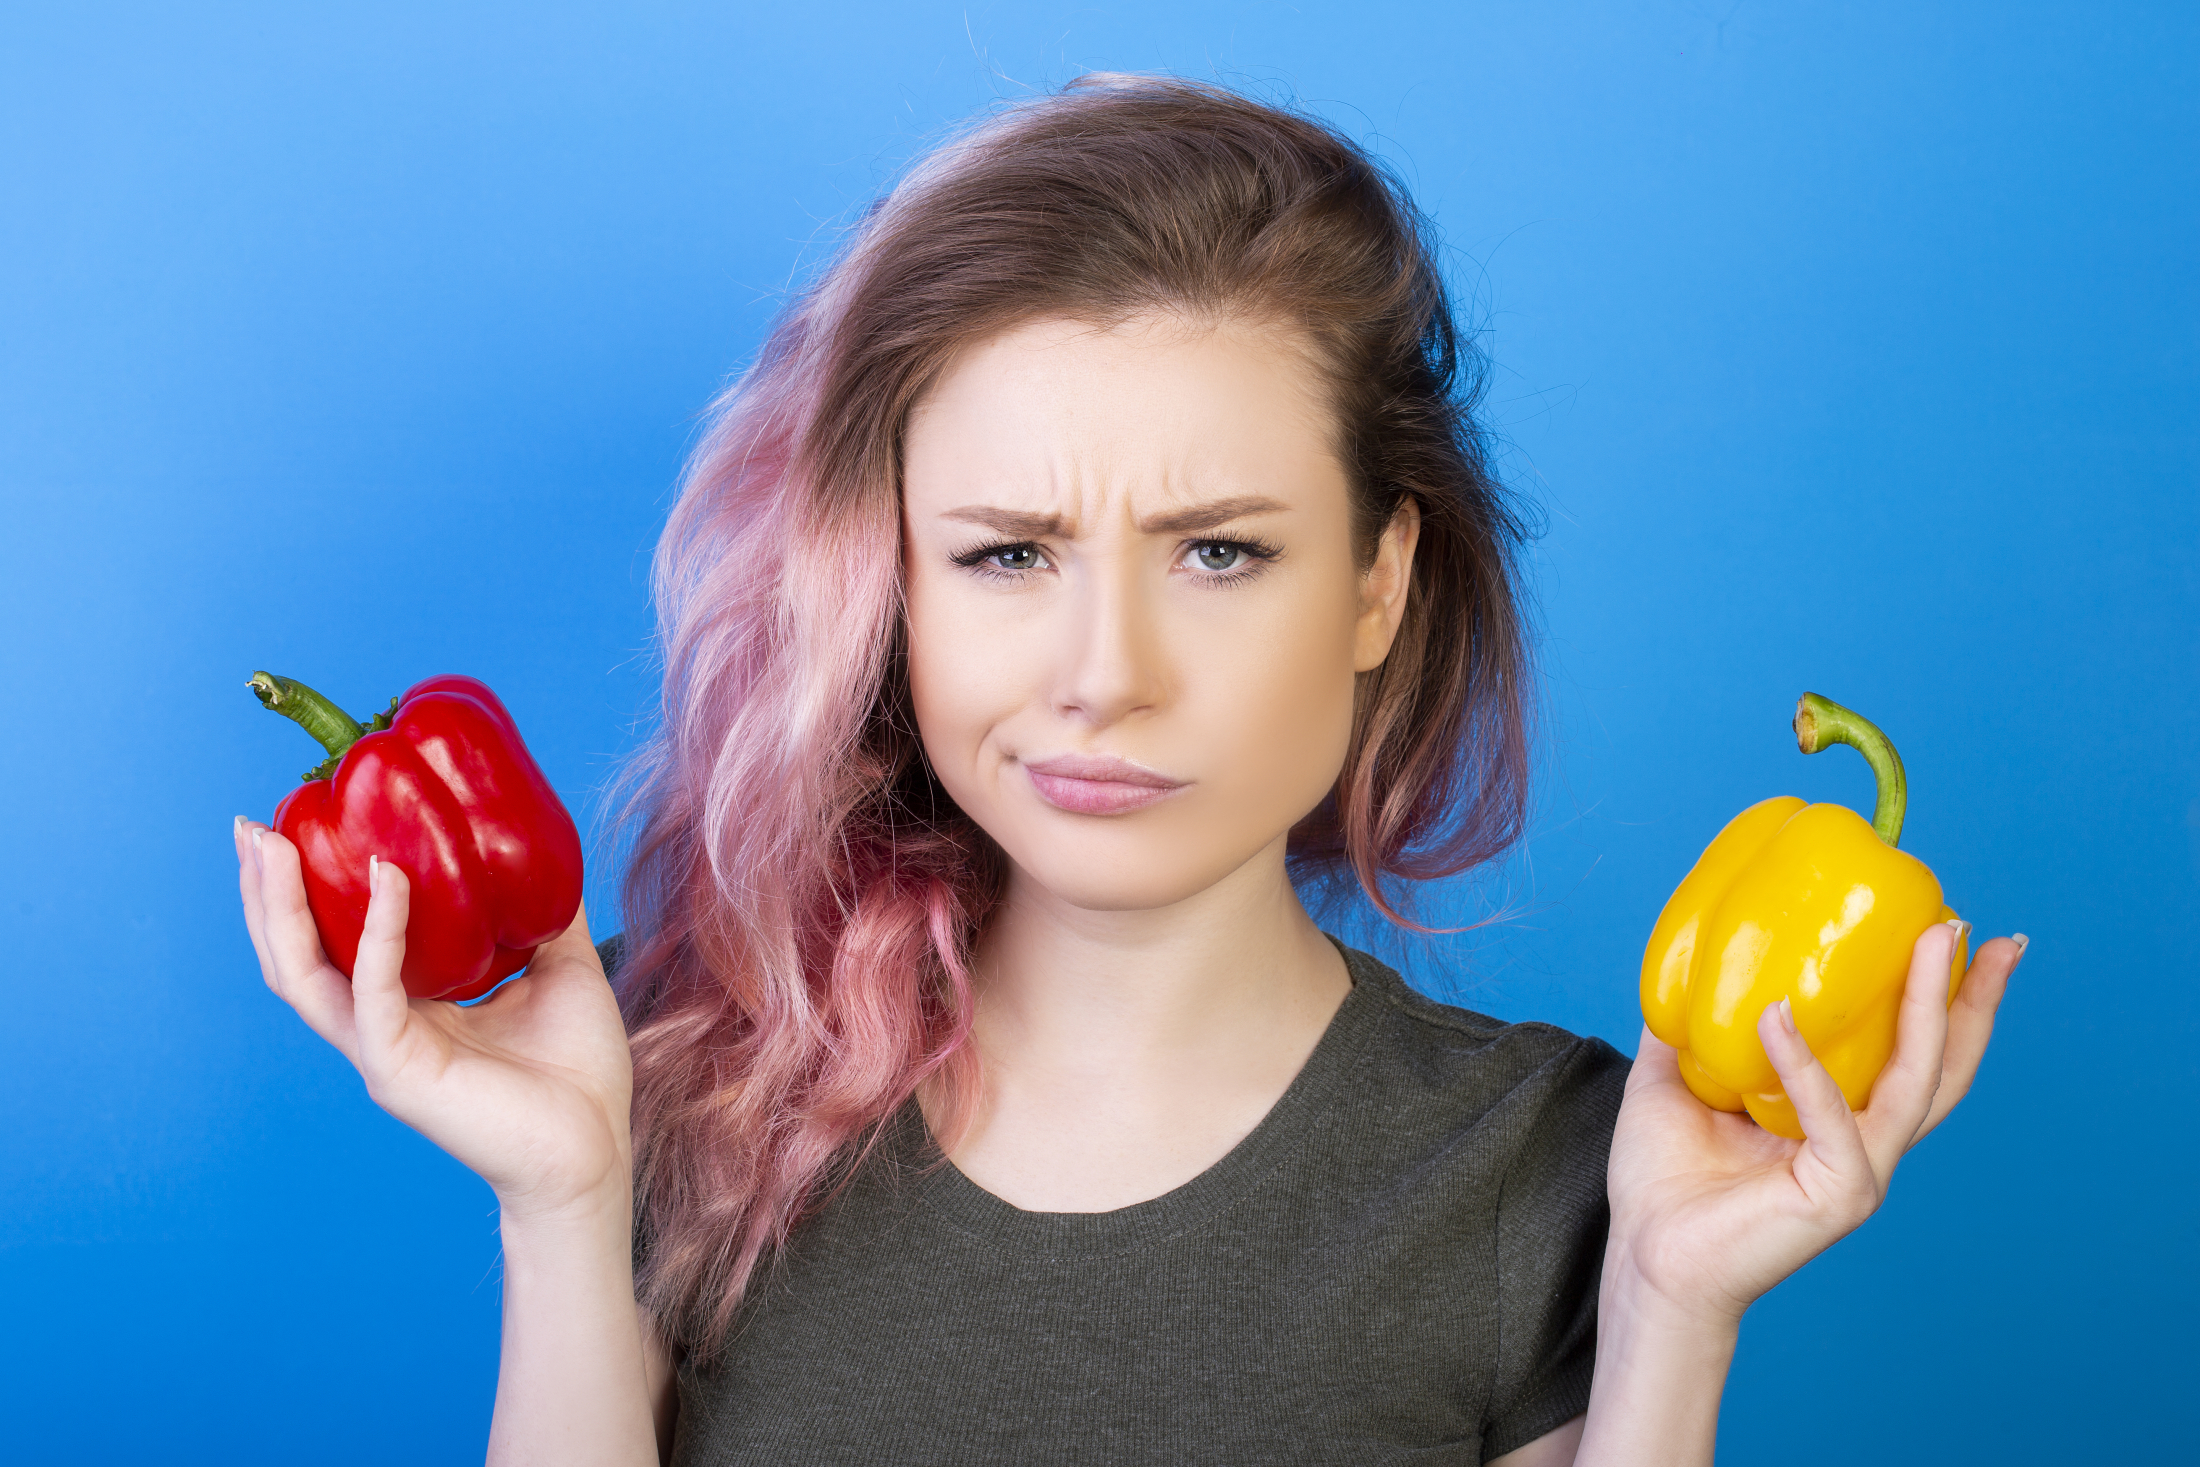 puzzled-woman-holding-red-and-yellow-peppers-in-different-hands.jpg